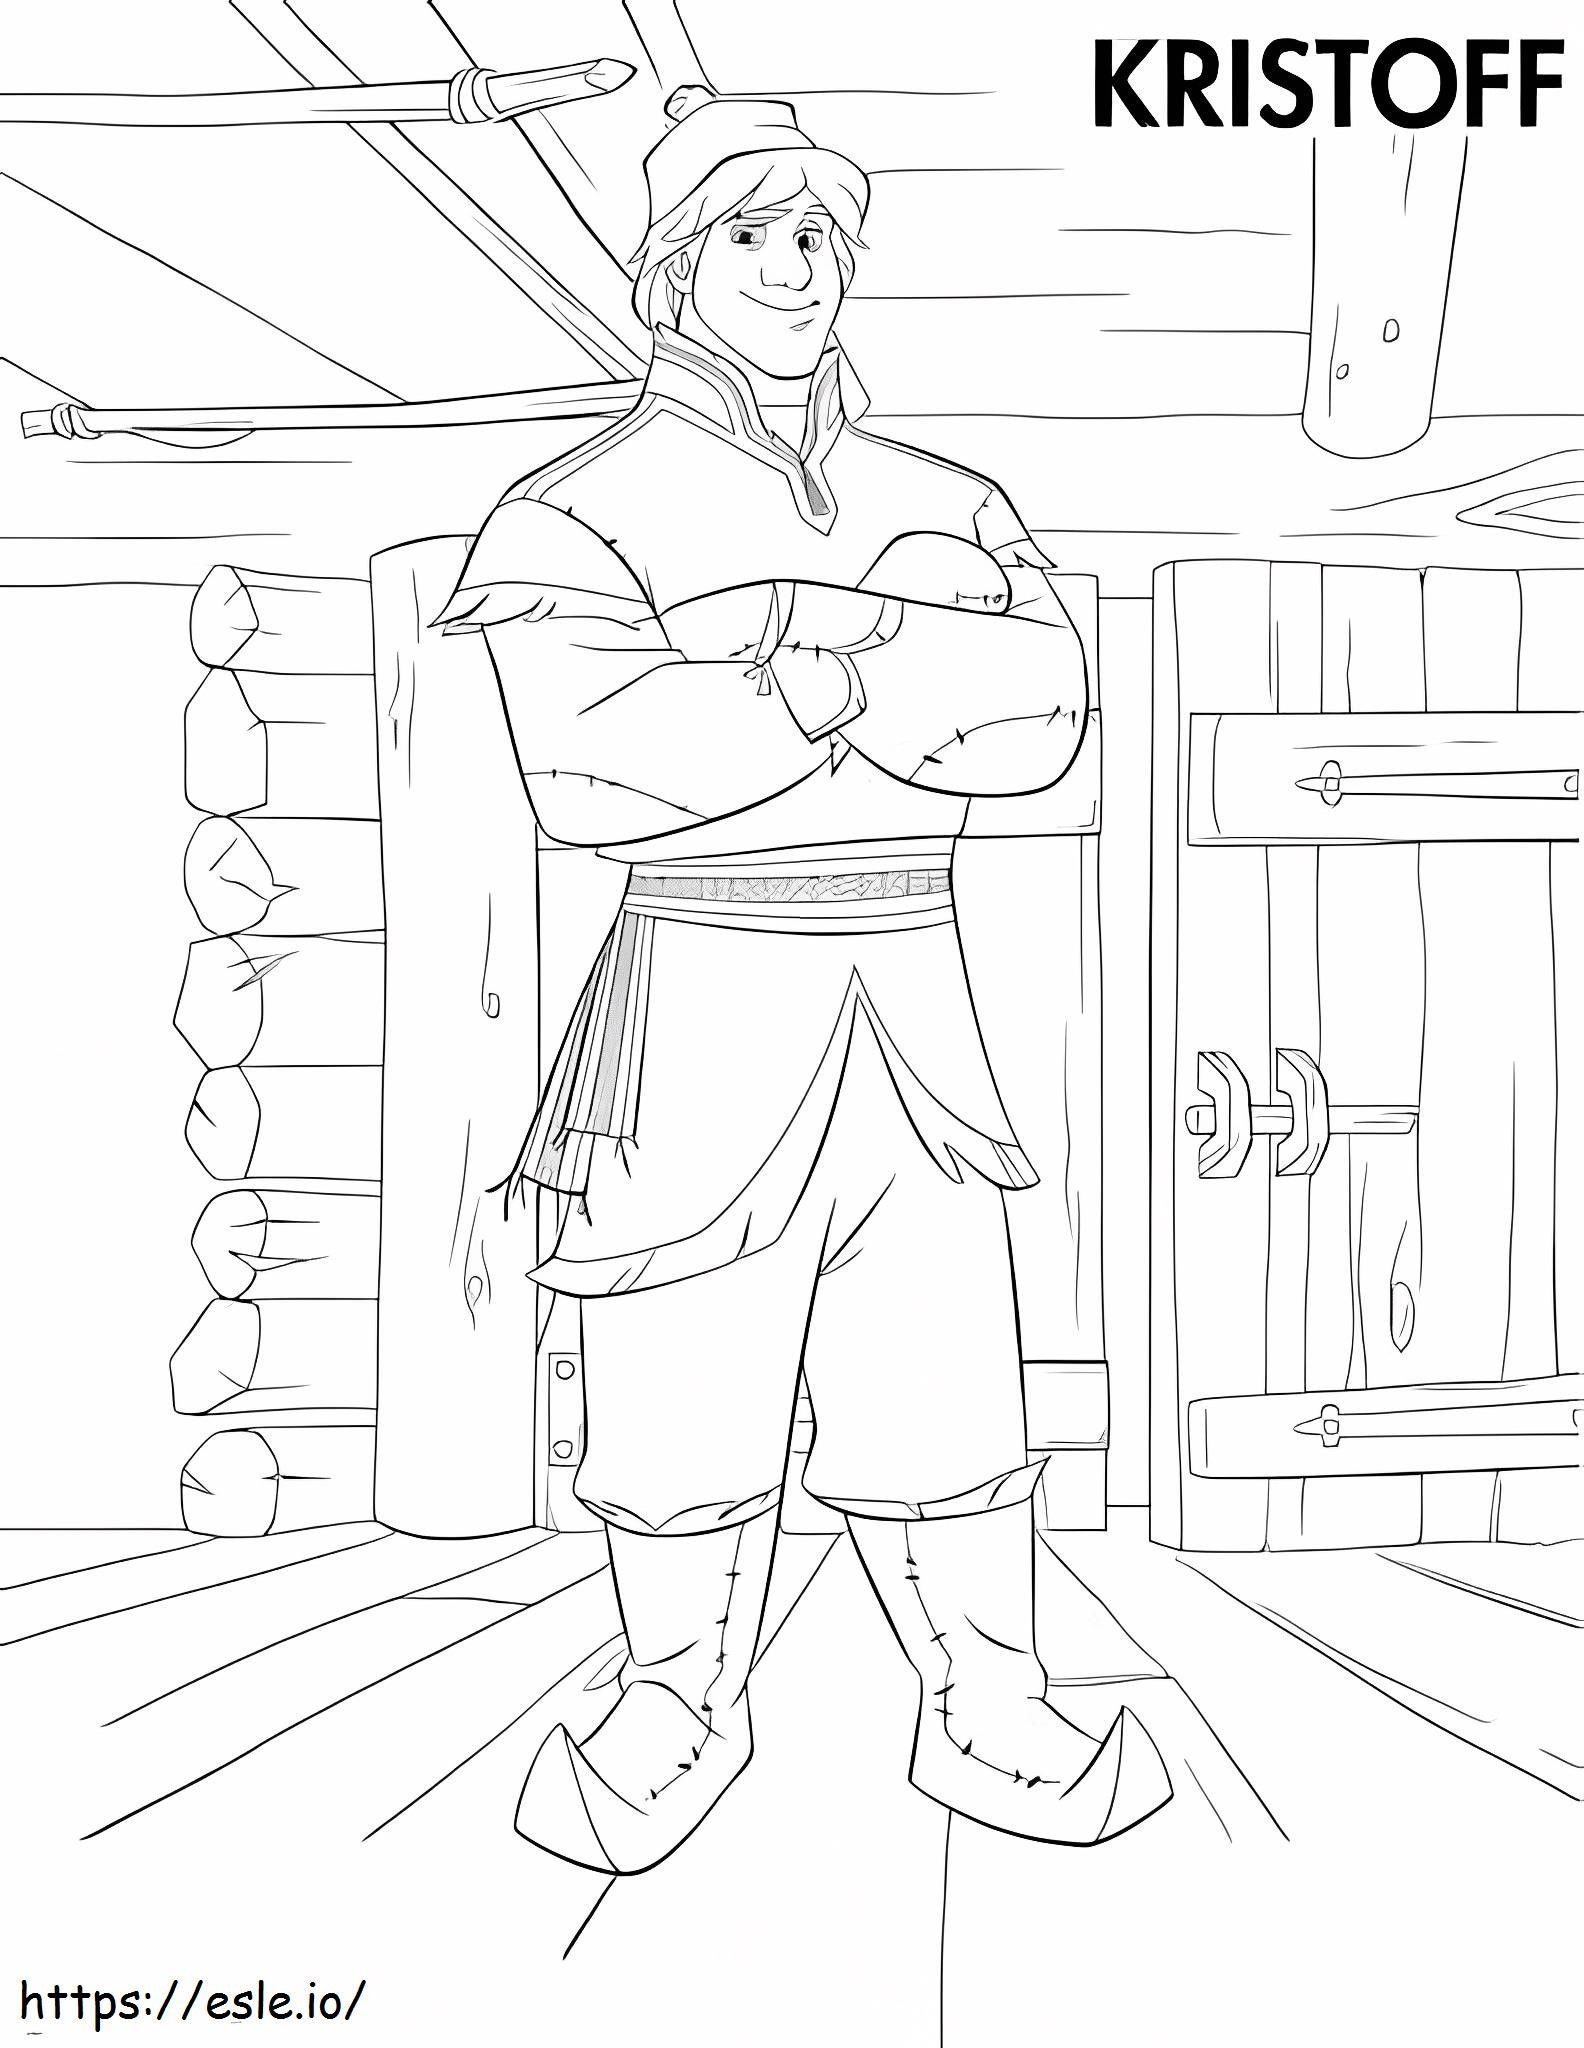 Kristoff At Home coloring page